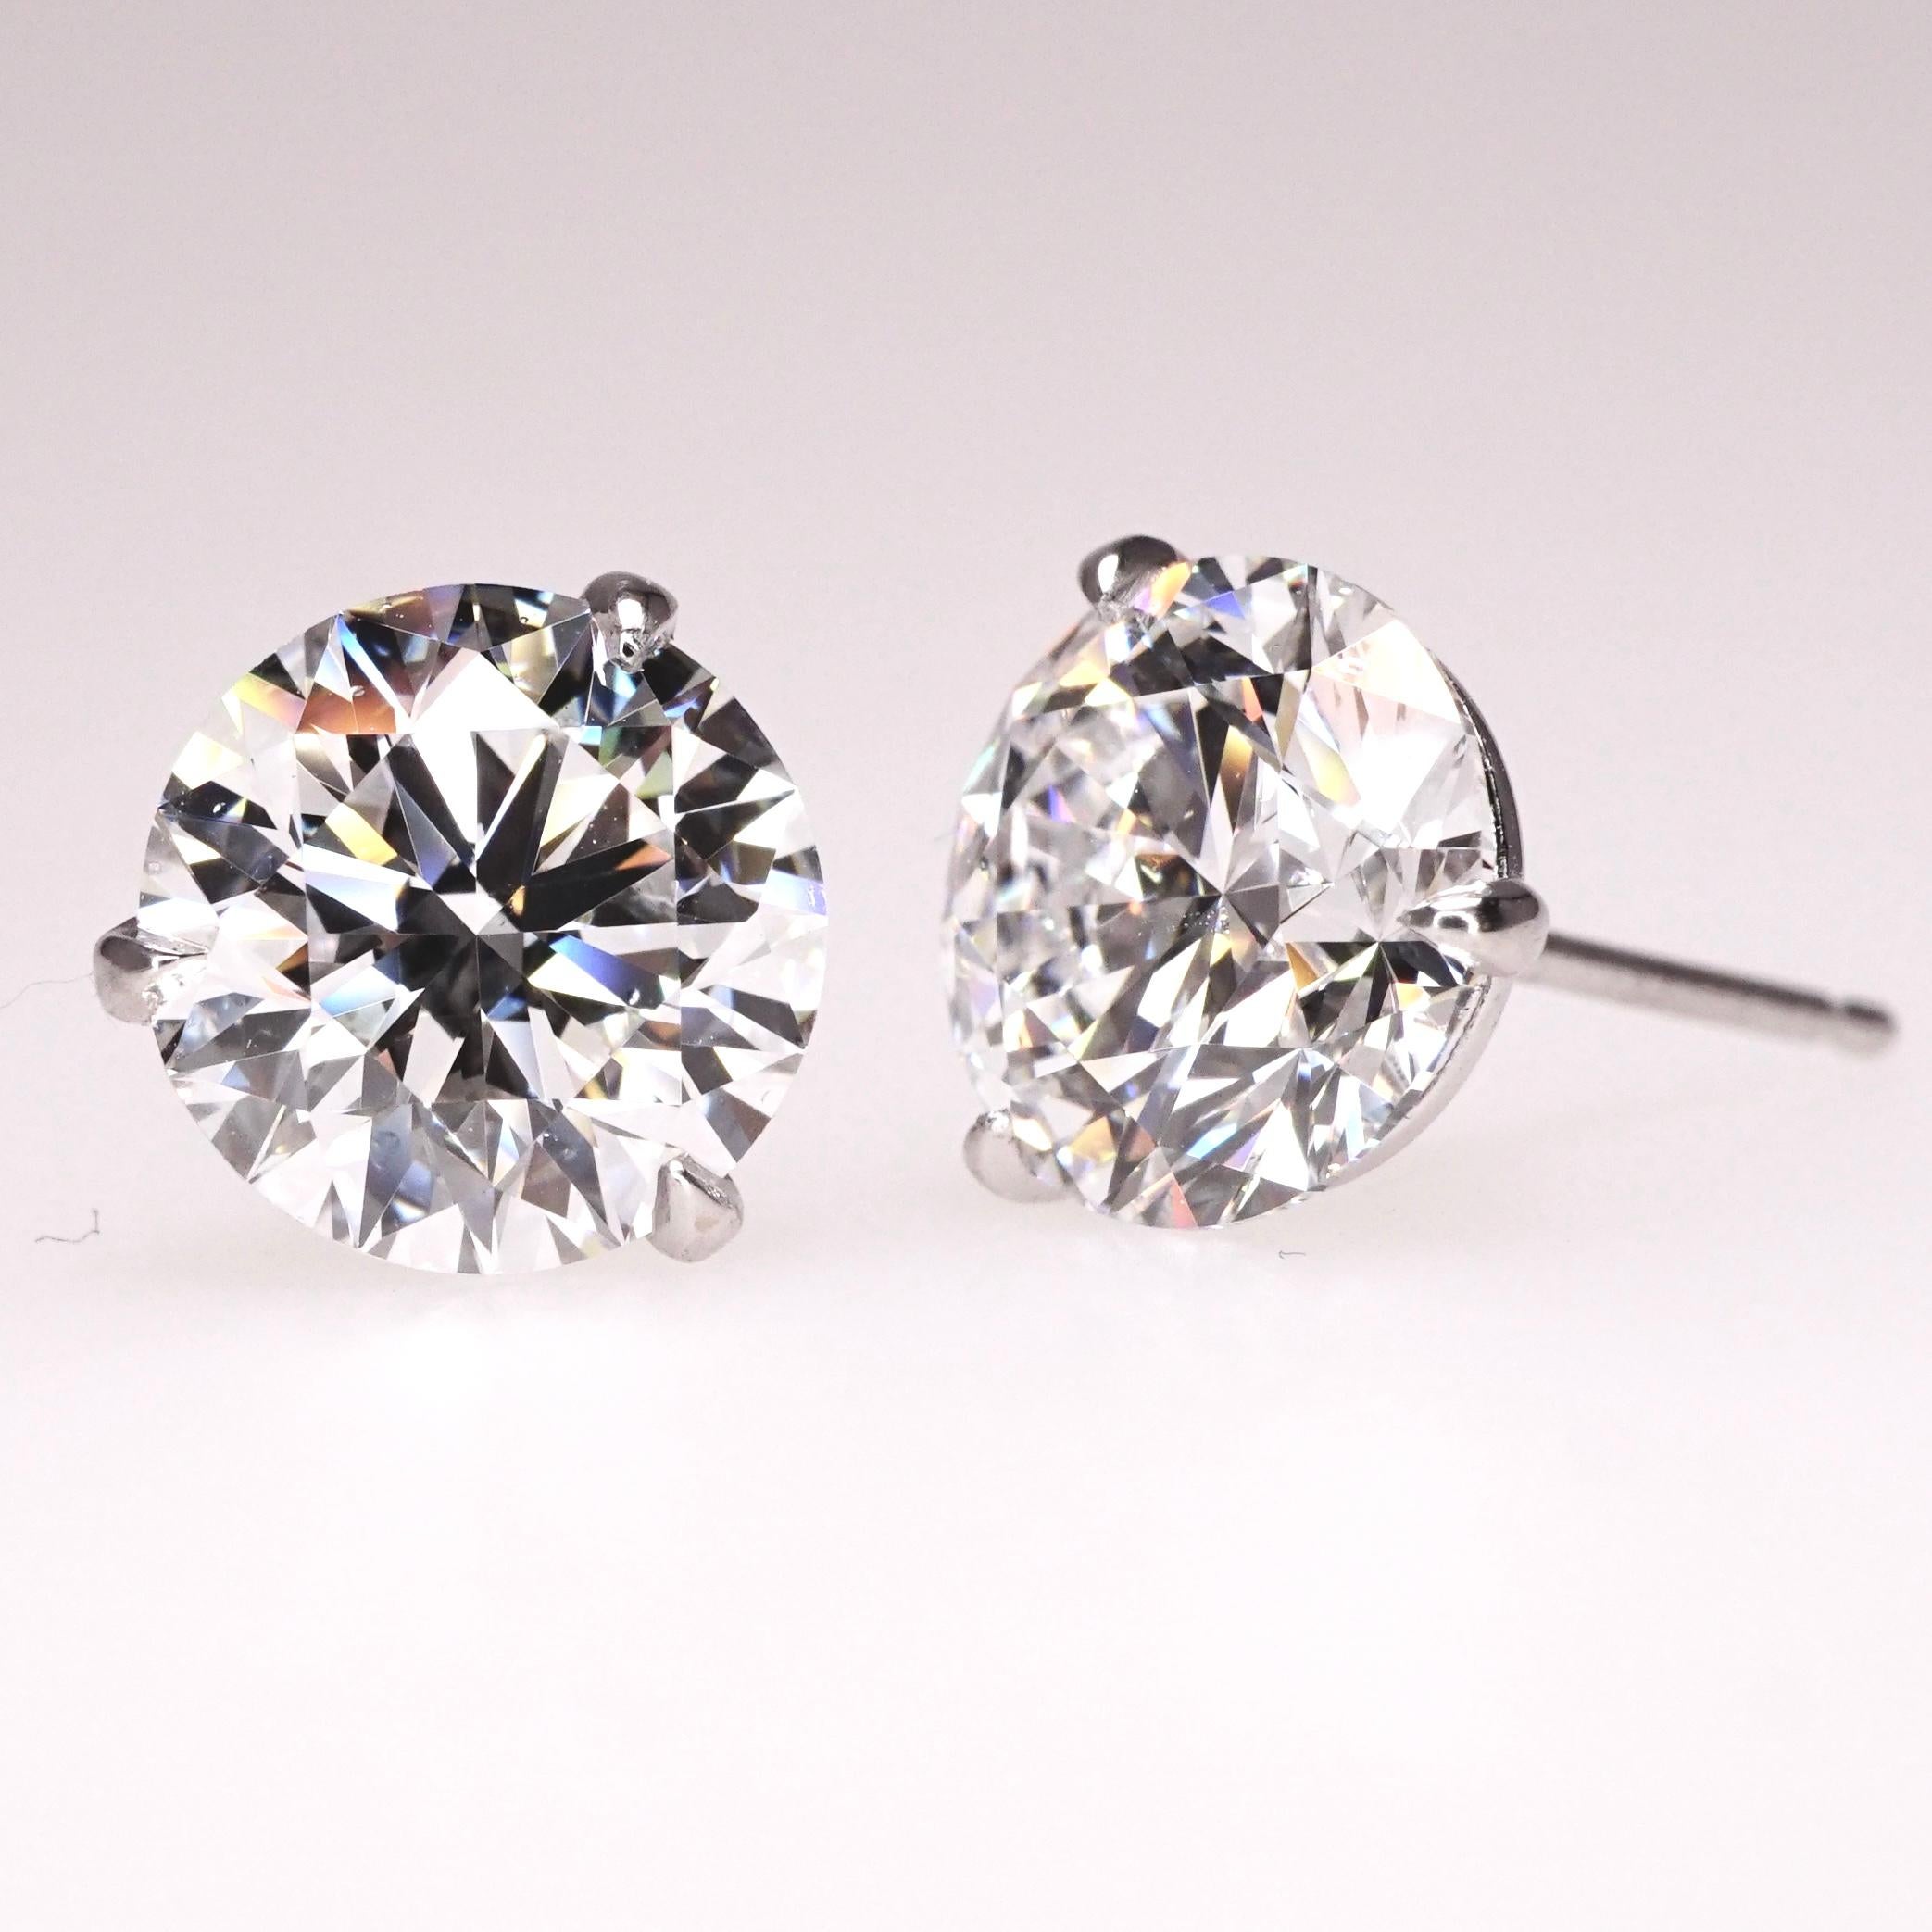 Brilliant Round diamond stud earrings set in Martini three prongs style setting In 18K white gold. Total carat weight: 3 ct. G color, SI1 clarity. Excellent cut. Excellent polish. Excellent symmetry. Fluorescence - none. Price may vary depending on